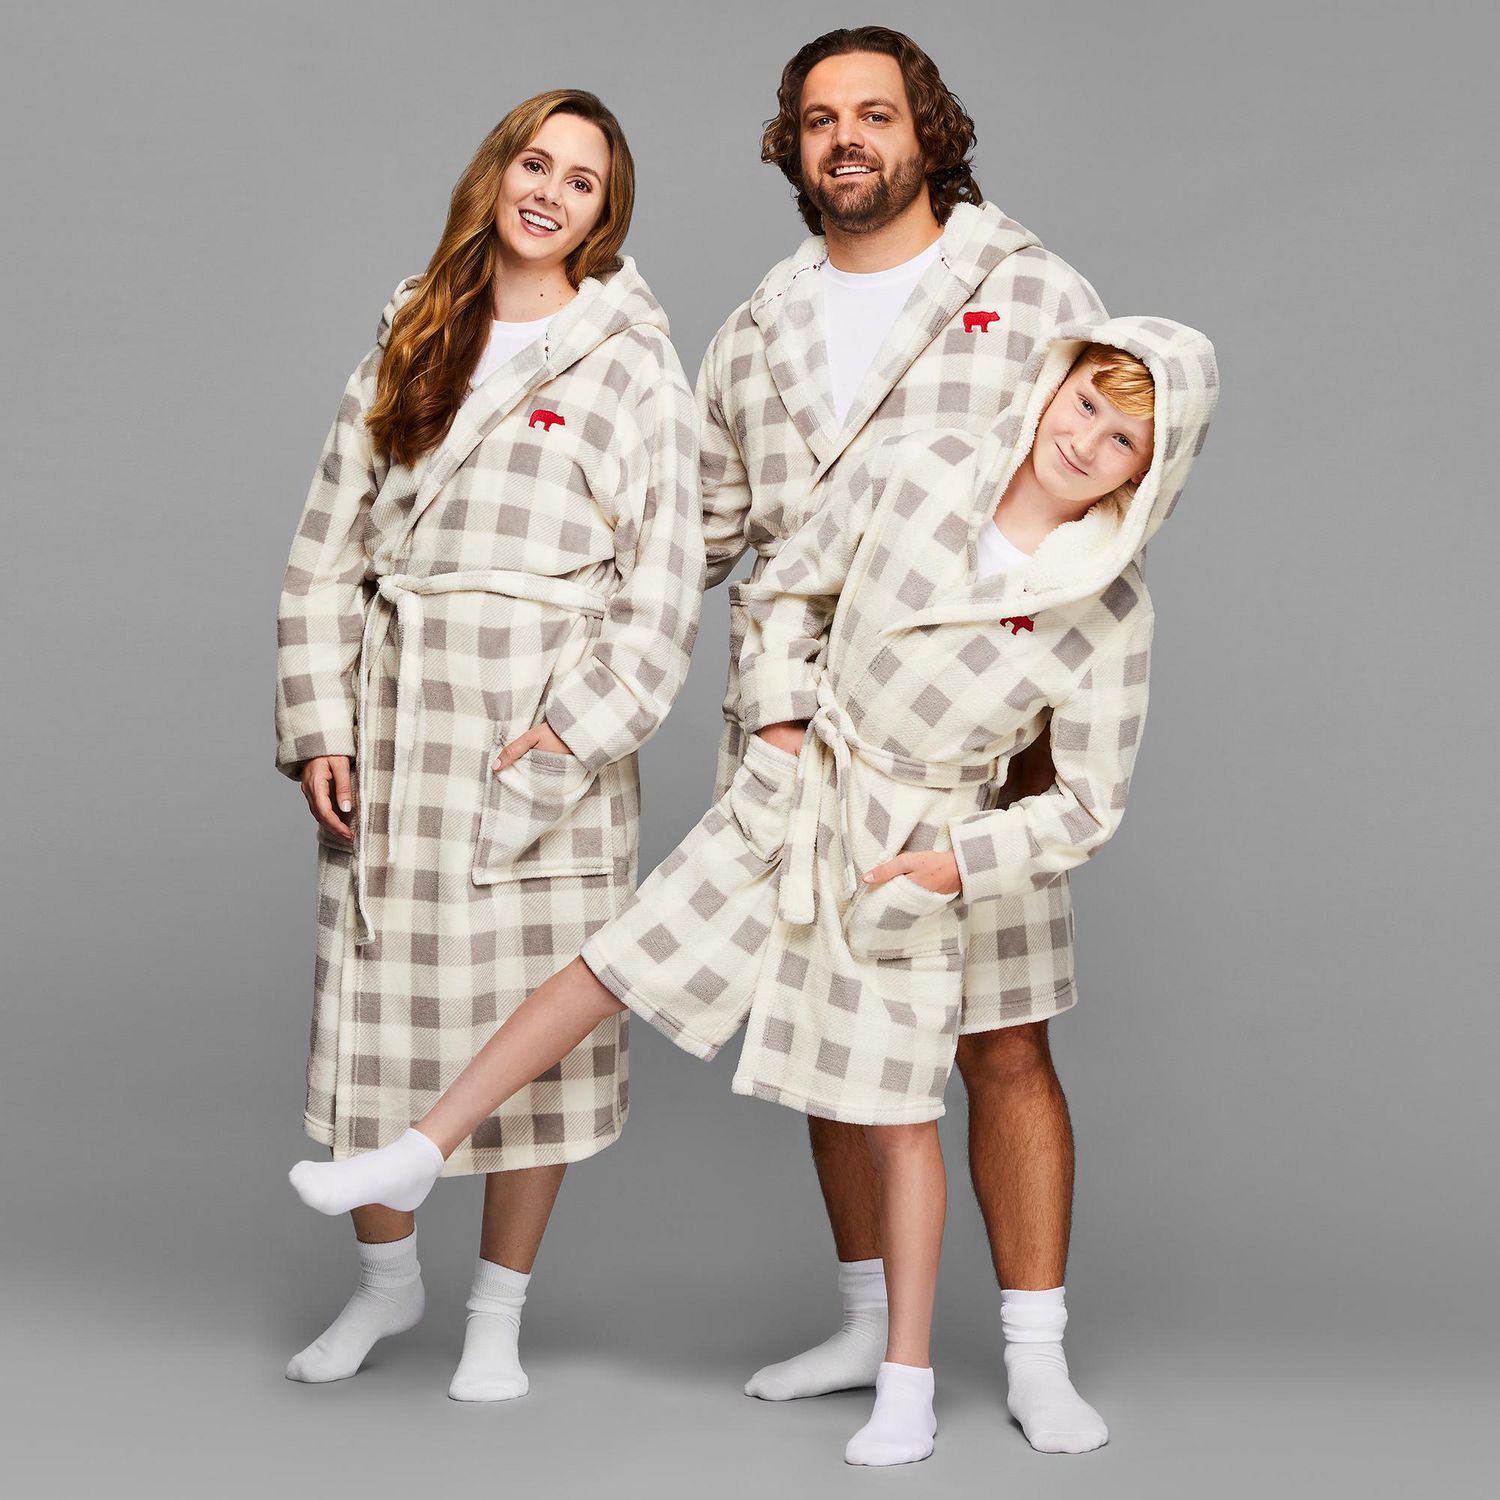 Buy Family Matching Long Sleeve Plaid Shirt Dress Mommy and Me Father and  Son Couples Matching Outfits Clothes at Amazonin